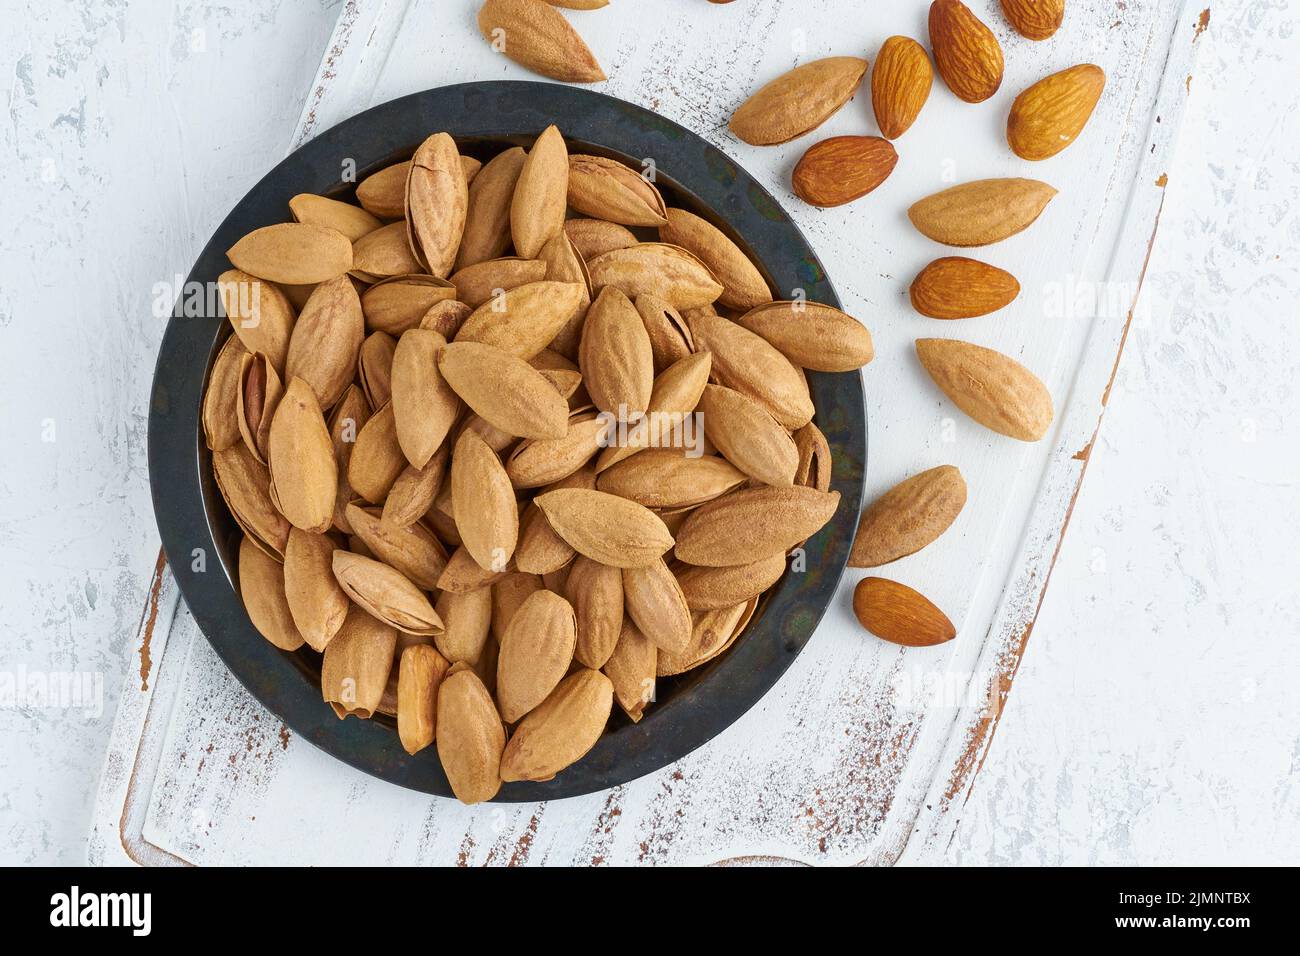 Top view plate with almonds in endocarp, bowl with drupe in shell on Stock Photo